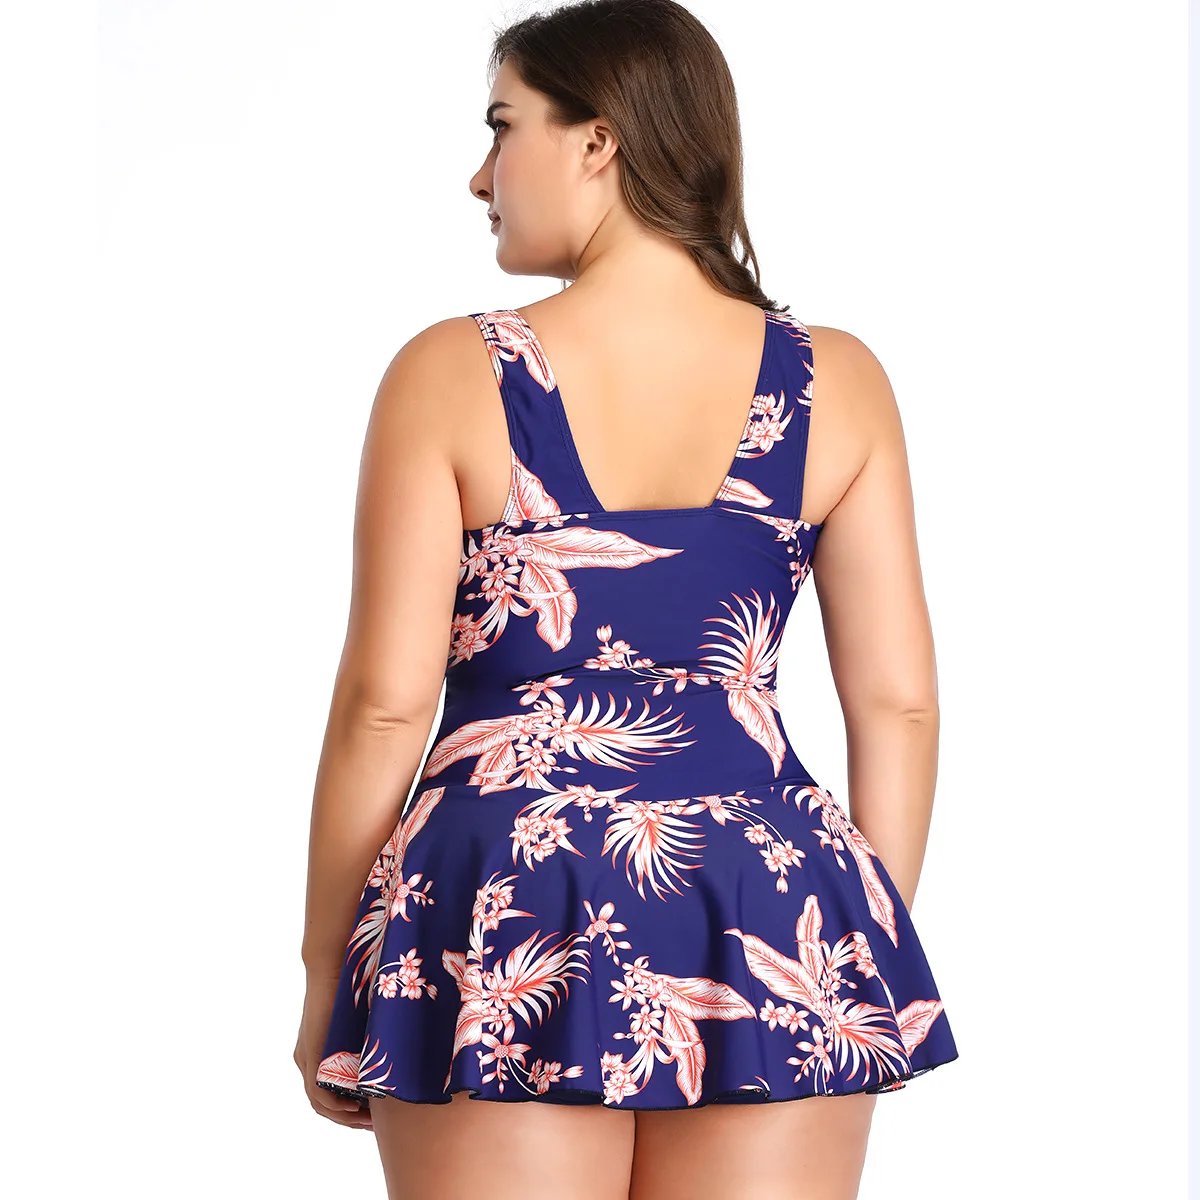 Summer 2023 Swimsuits Women Bikini Set Corset Swimwear S-5XL Beach Outfits Plus Size Swimsuit With Cover Up Girls Bathing Suit